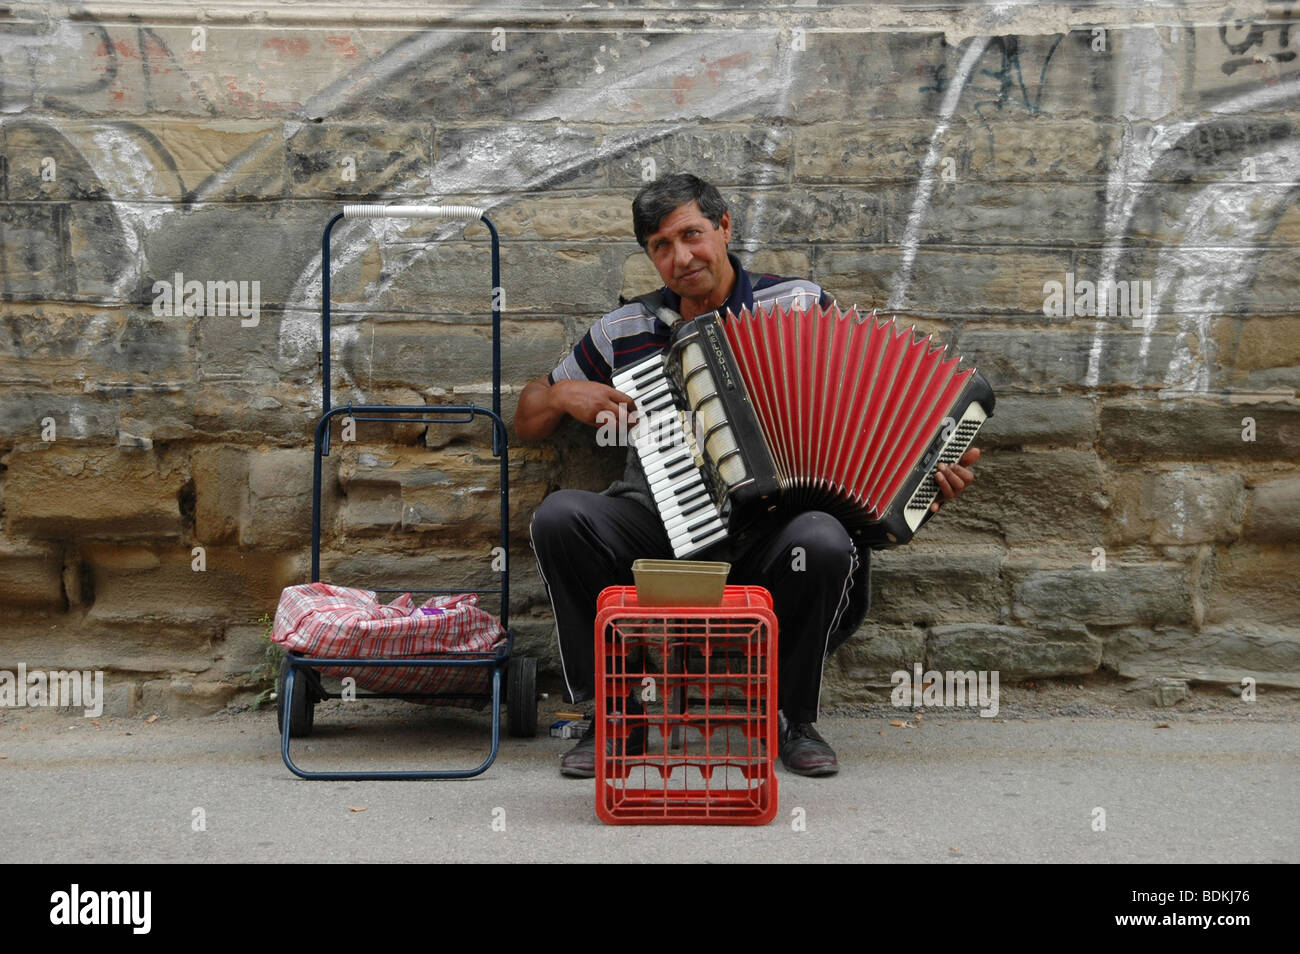 A gypsy street musician playing the accordion in the city of Tuzla, in Bosnia and Herzegovina. Stock Photo